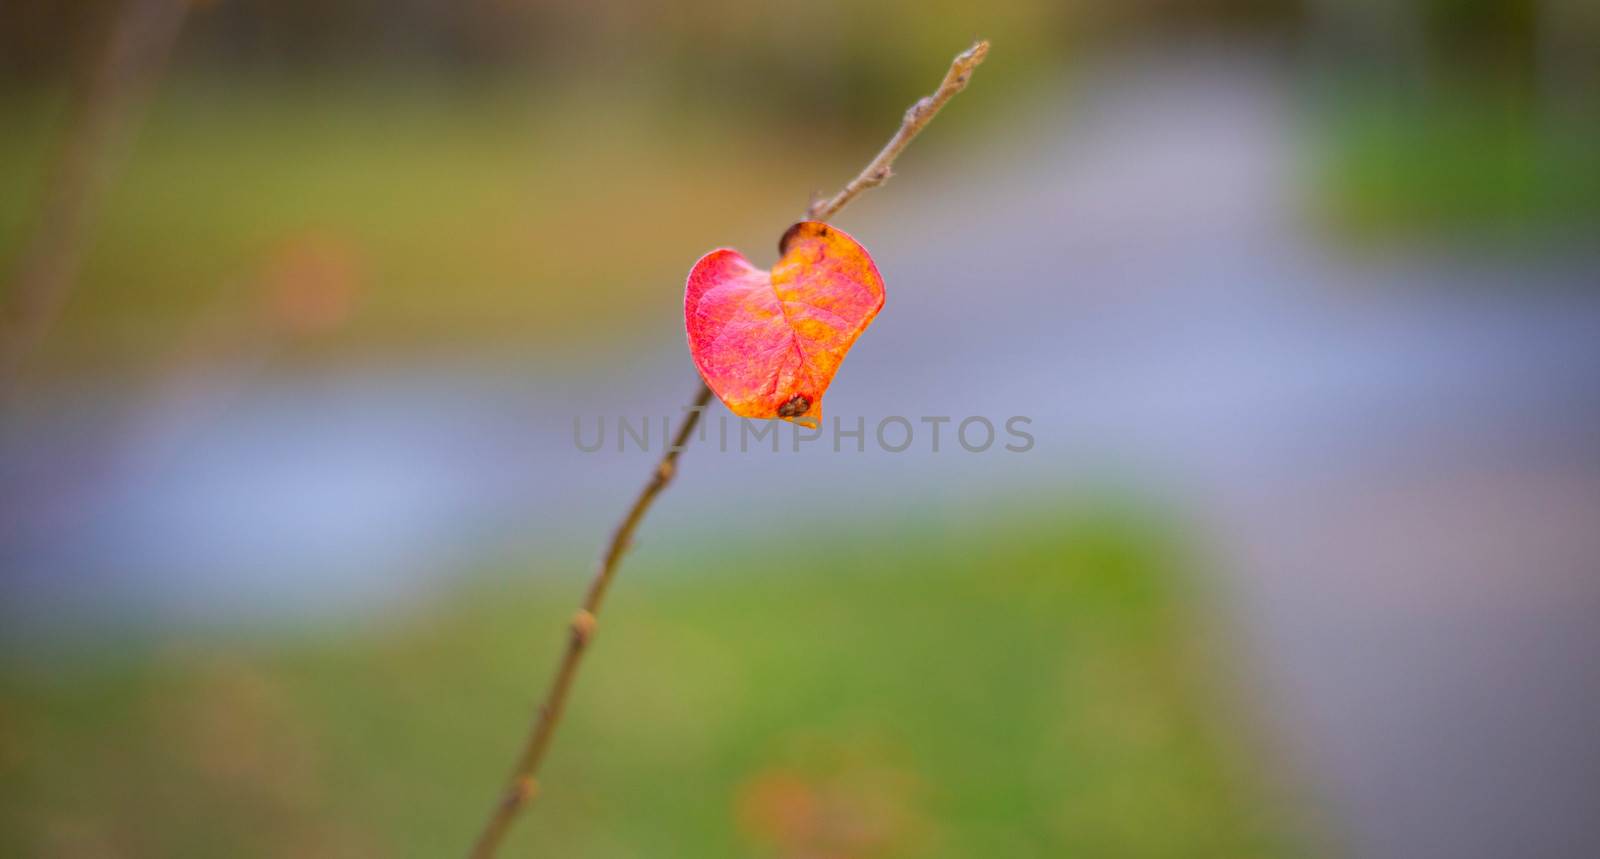 Autumn red leaf on a branch 2020